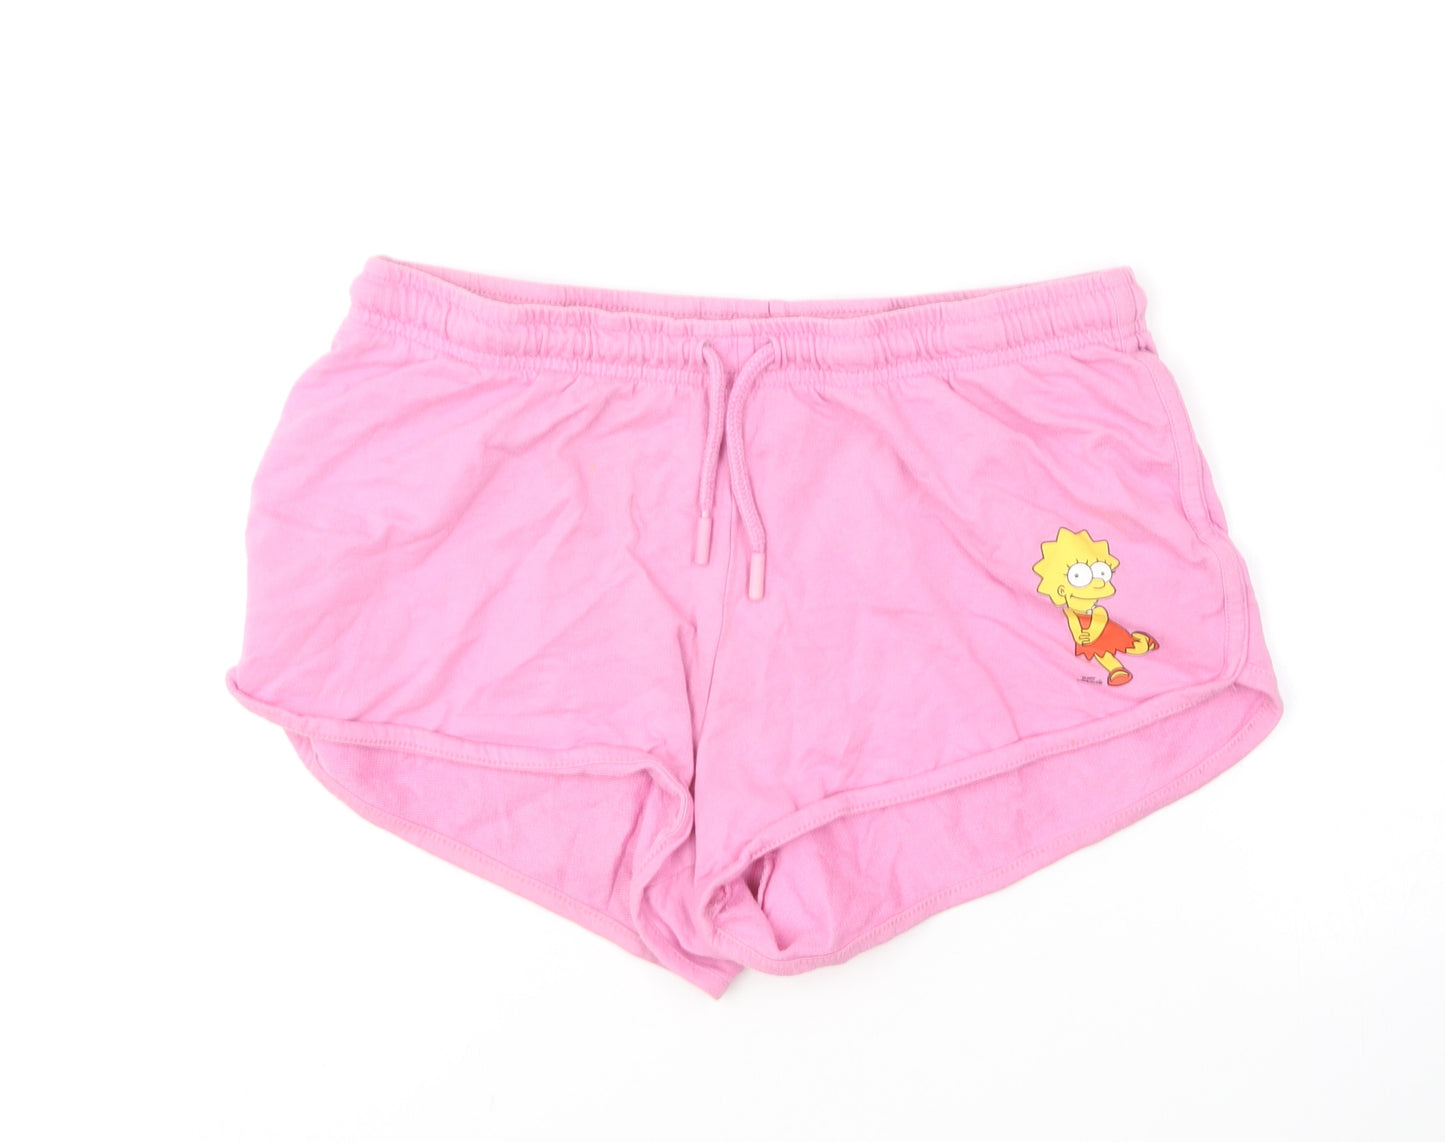 The Simpsons Womens Pink  Cotton Sweat Shorts Size 10 L6 in Regular  - Lisa Simpson